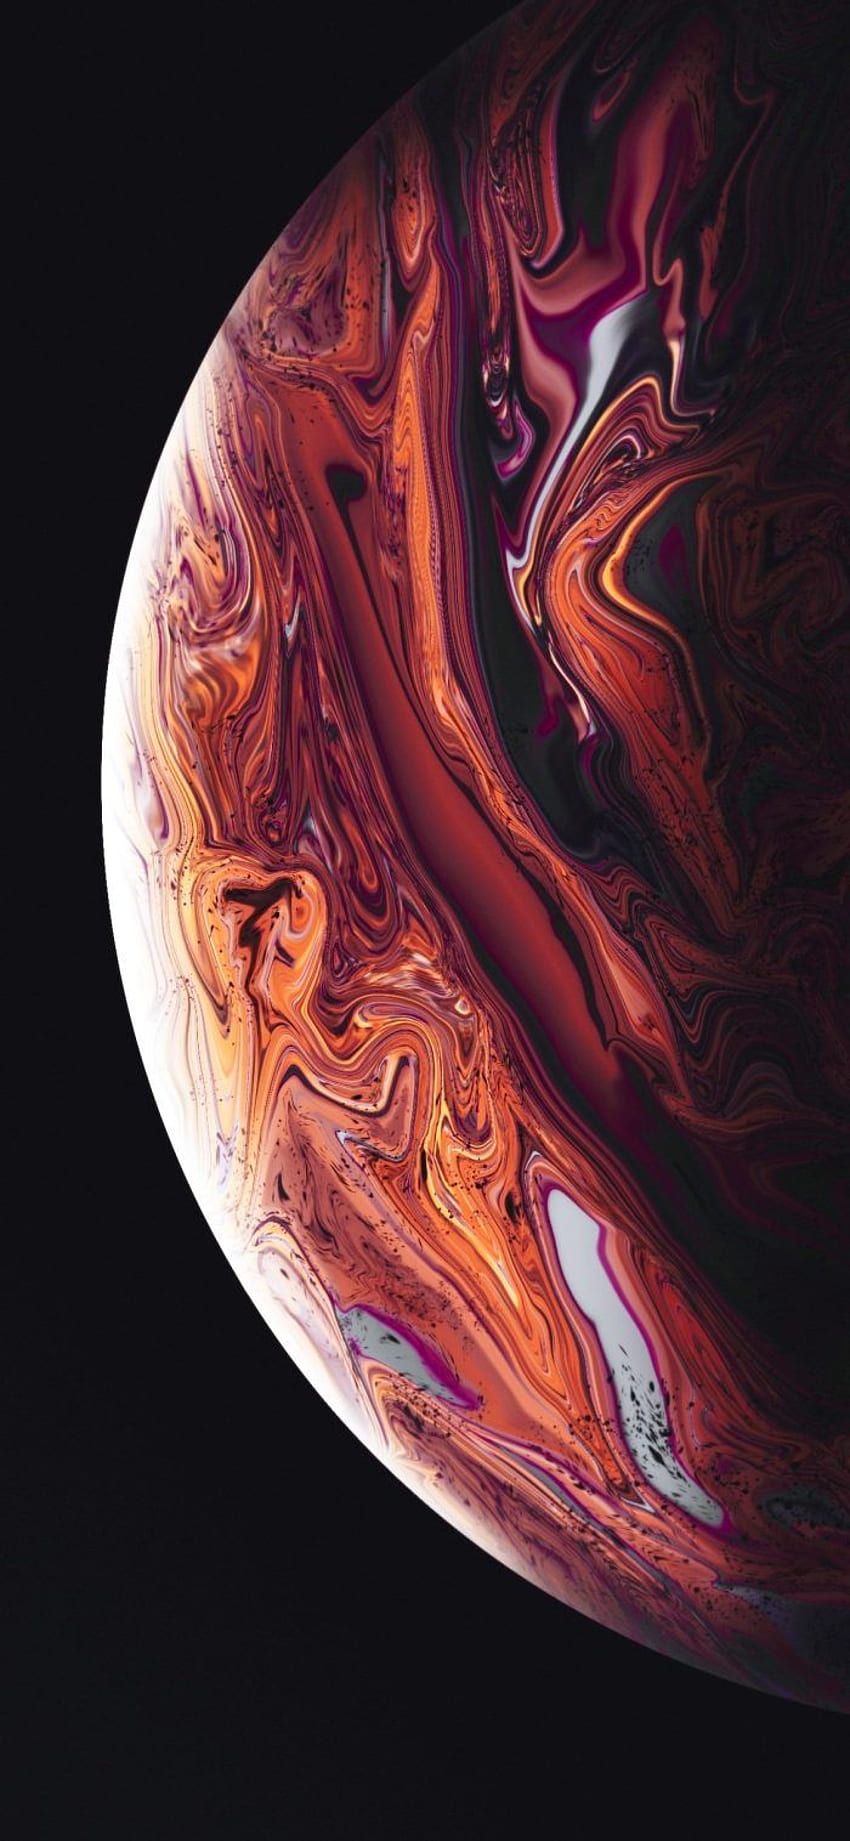 iPhone XS . 2019 3D iPhone . Screen , iPhone , Cool for phones, High Definition iPhone HD phone wallpaper